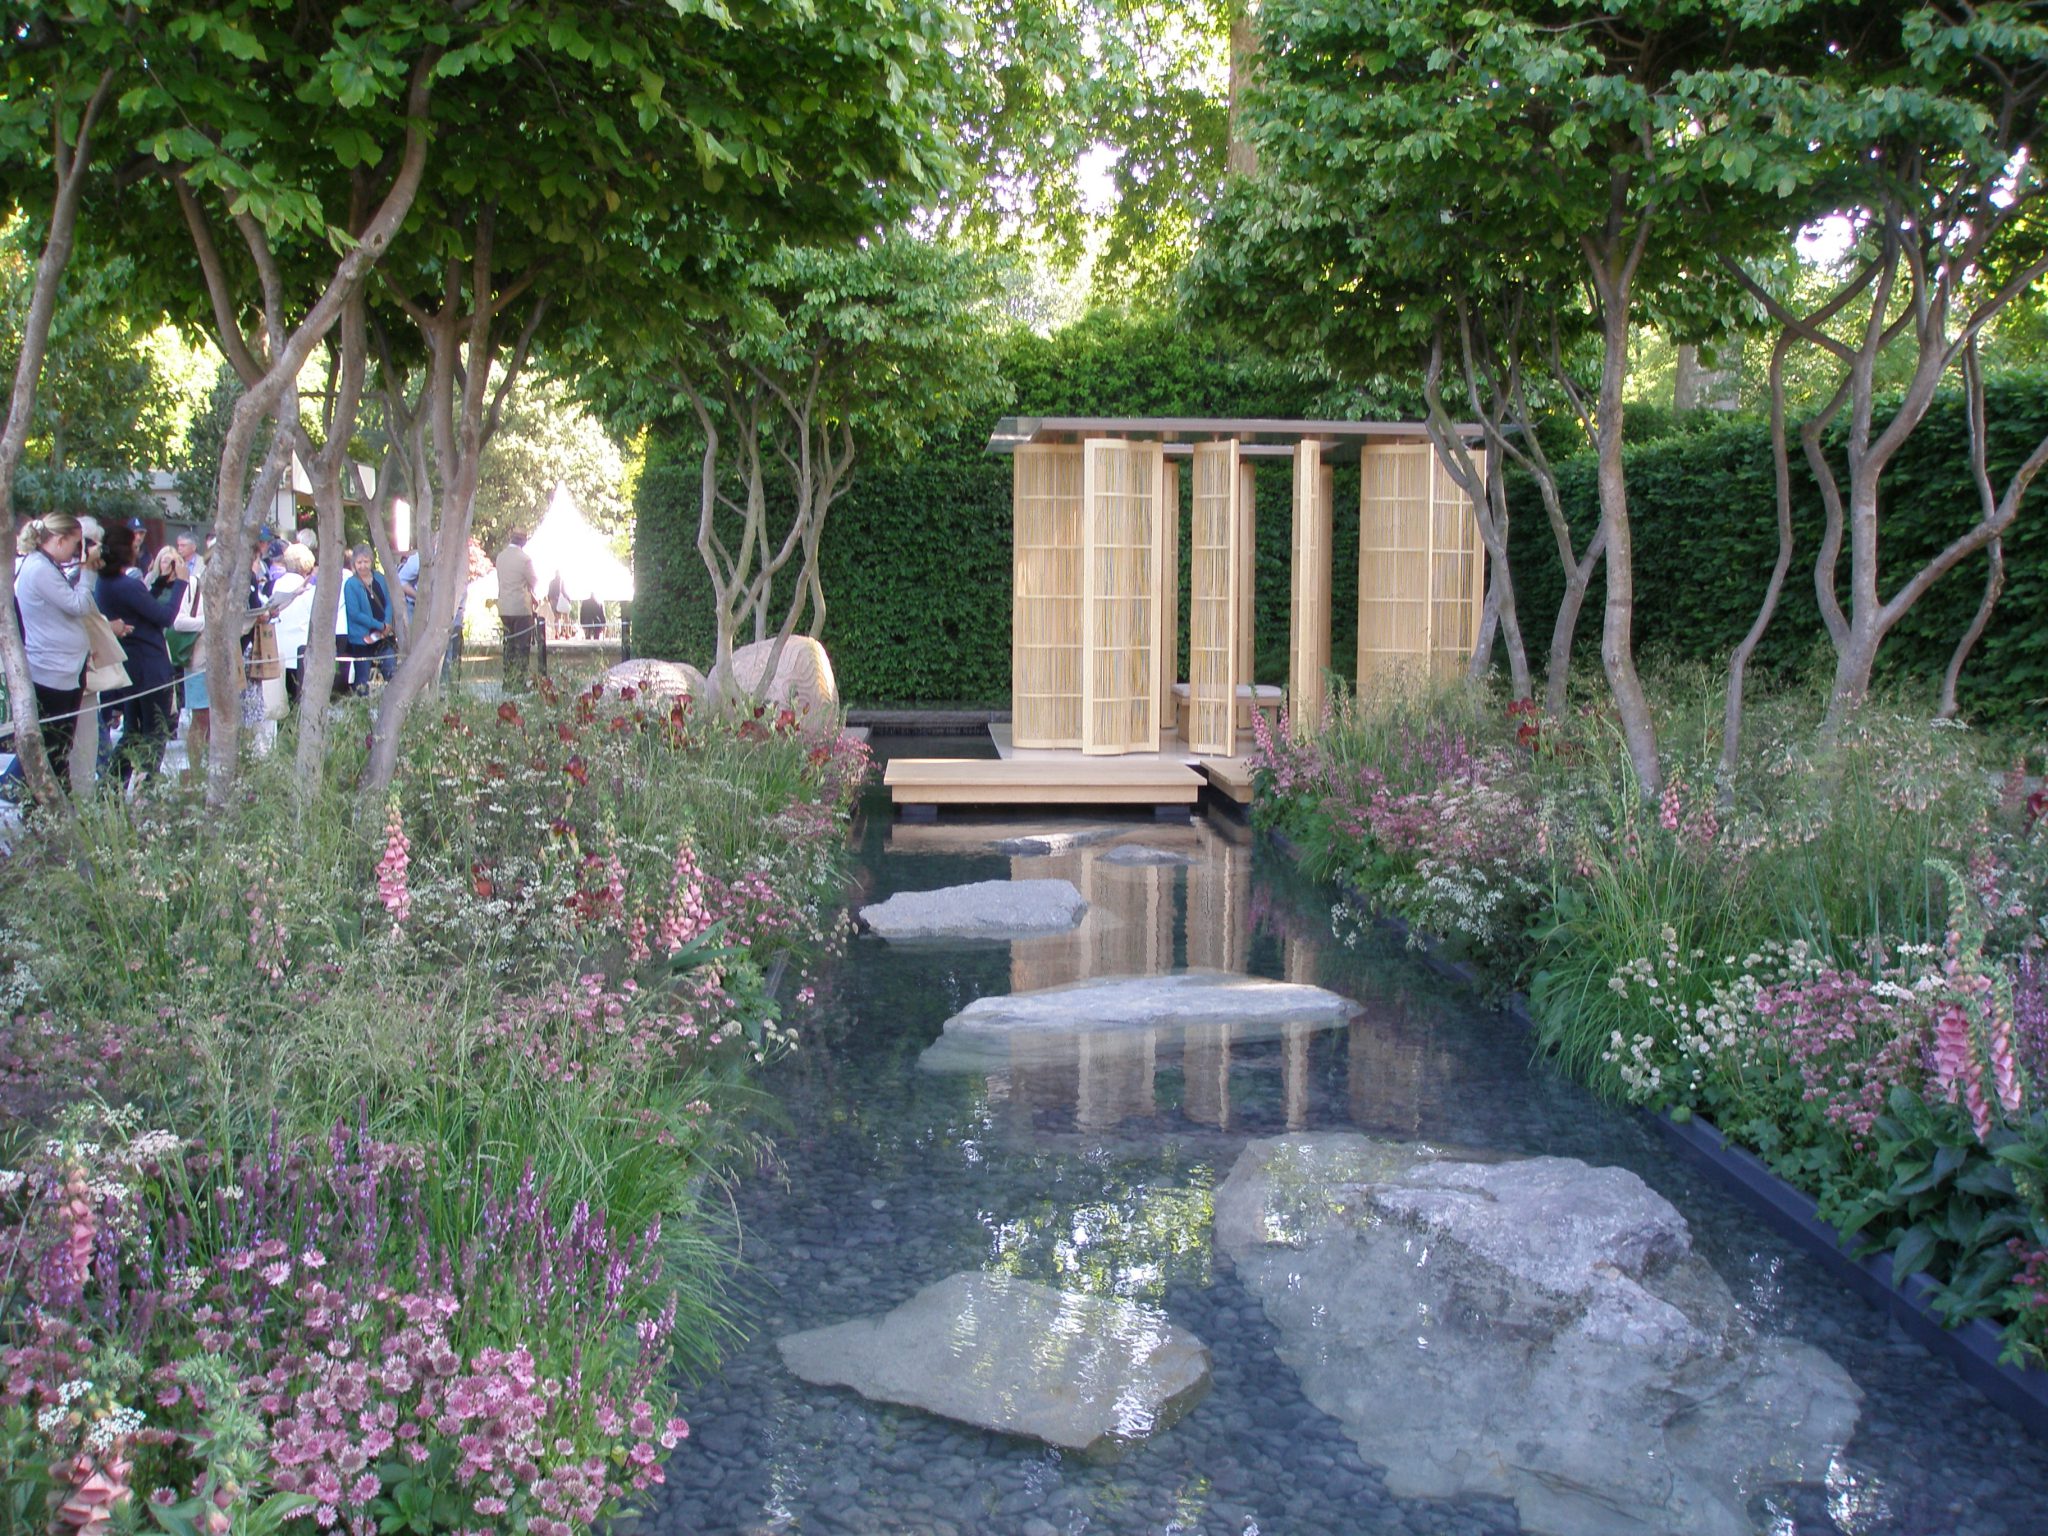 At the Chelsea Flower Show in May 2011